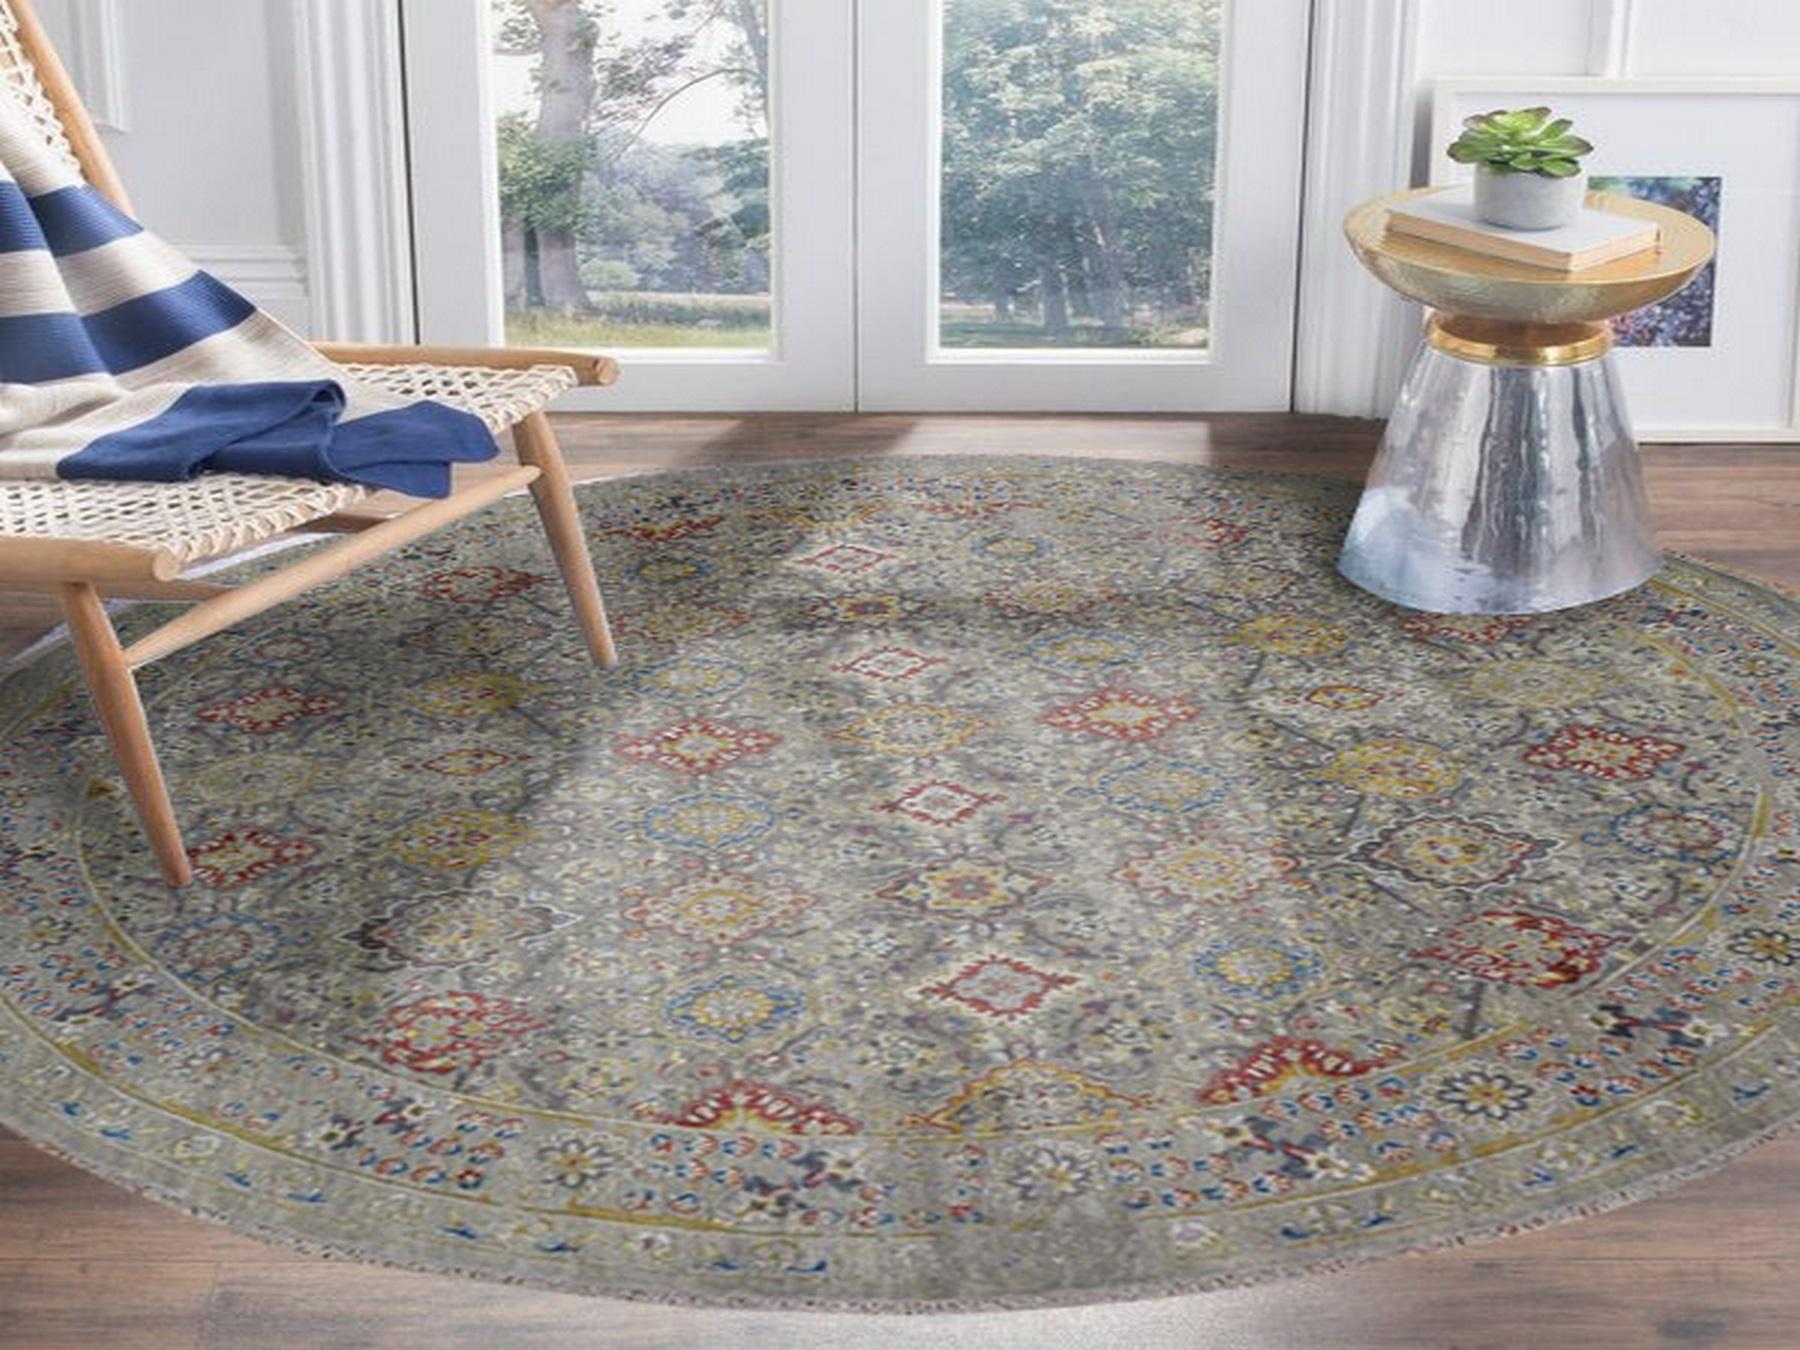 This is a truly genuine one-of-a-kind THE SUNSET ROSETTES pure silk and wool hand knotted oriental round rug. It has been knotted for months and months in the centuries-old Persian weaving craftsmanship techniques by expert artisans.

Primary